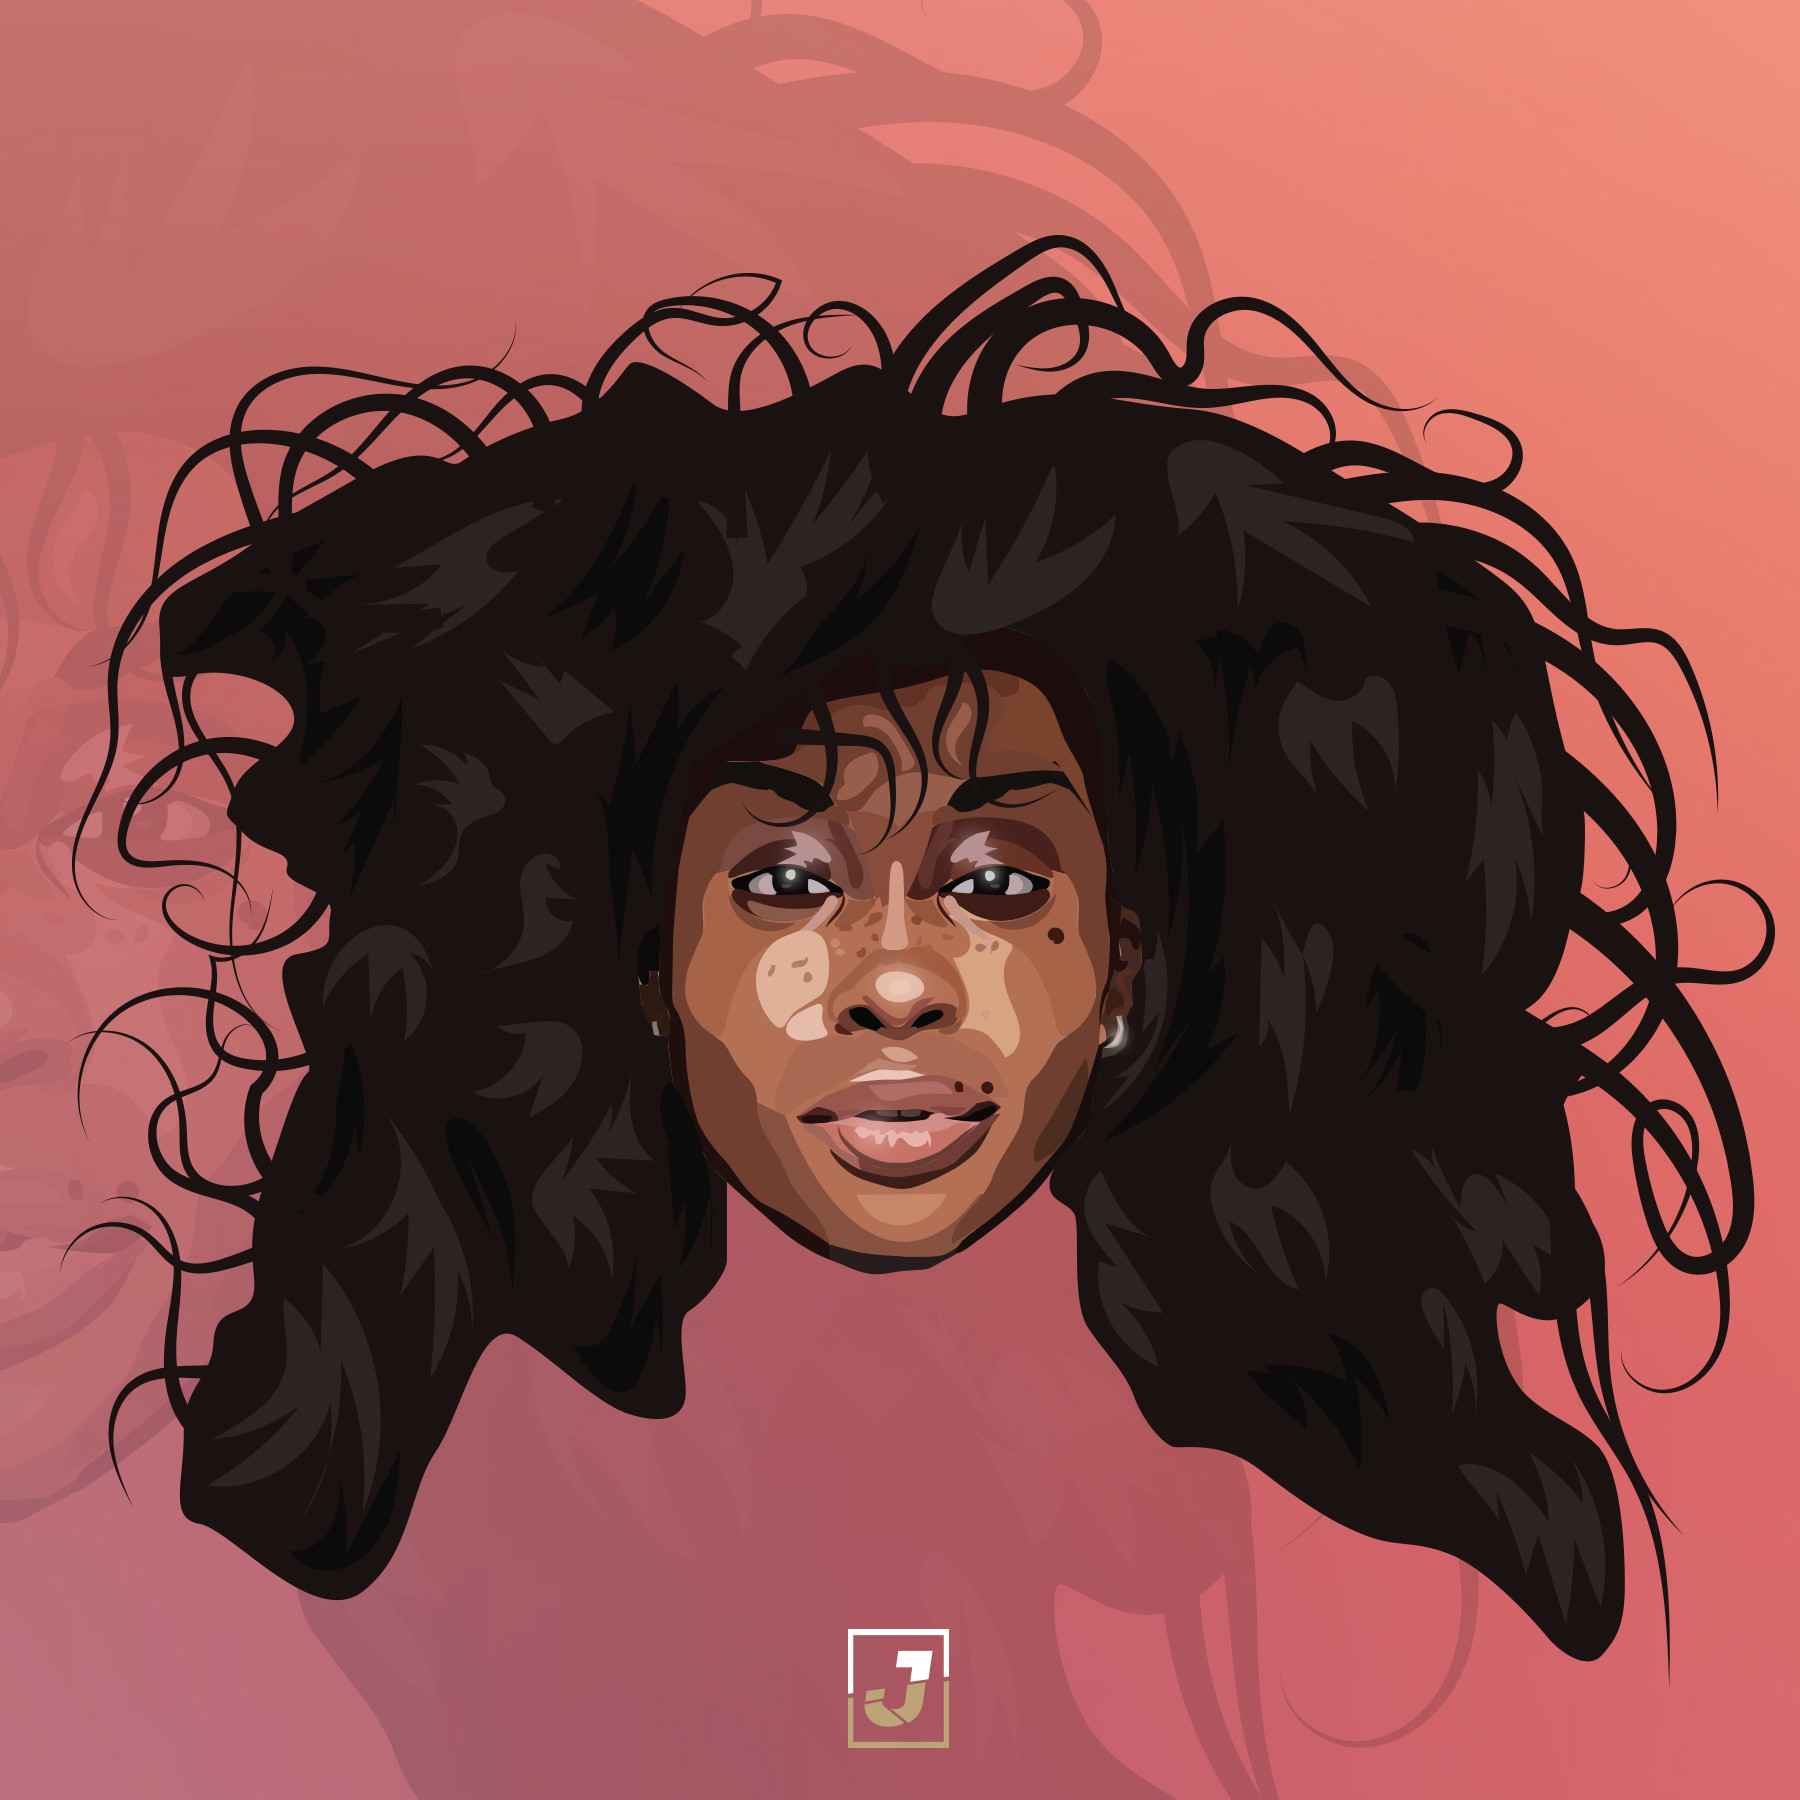 SZA by Jerry Ubah. 